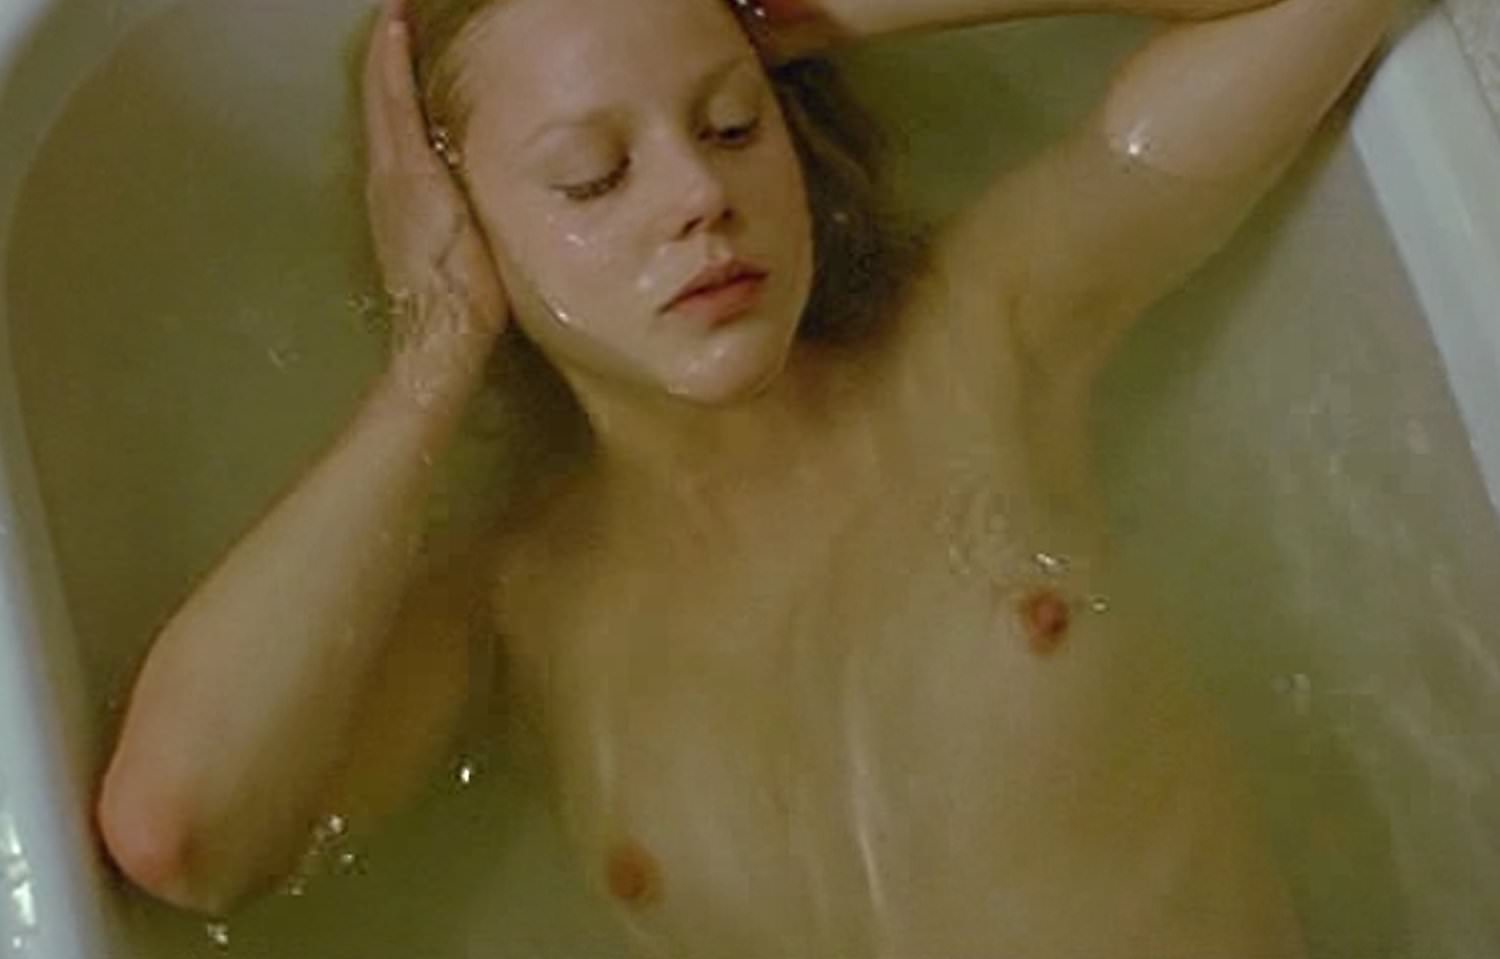 Abbie Cornish - Teen Girl, Small Boobs, Blonde, Toples & Nude - Somersault.